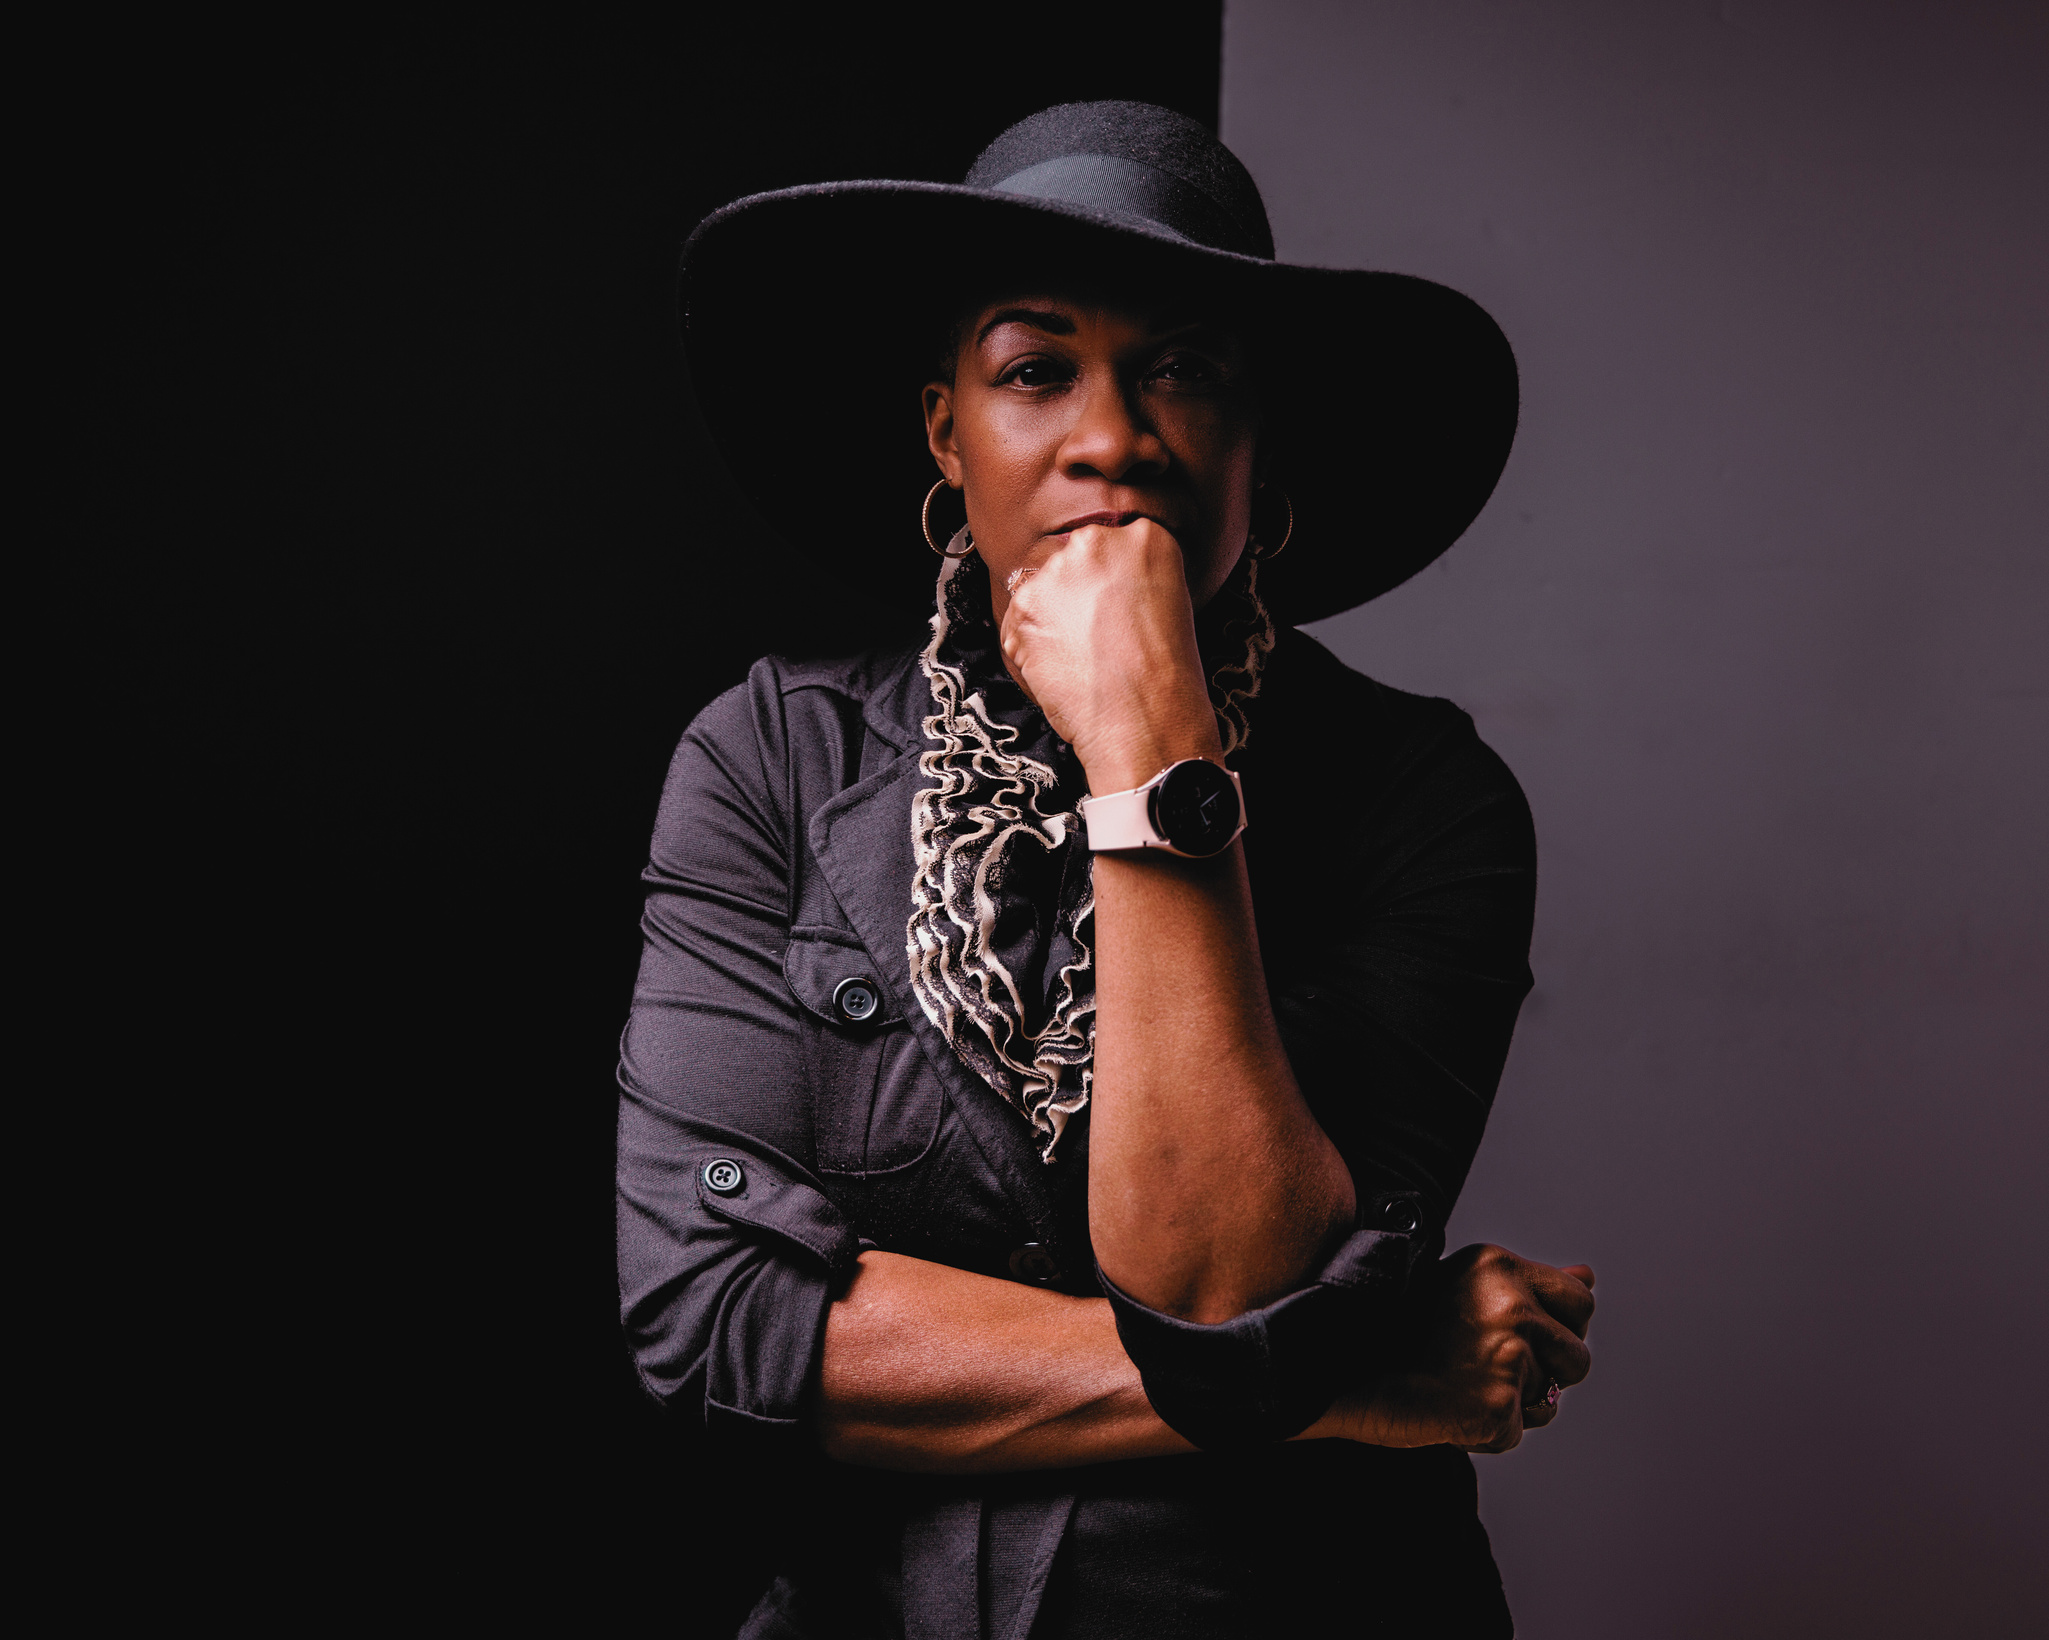 Gwendolyn R. Houston-Jack an African American woman who is a small business owner, creative, and podcaster is wearing a black hat and a scarf.